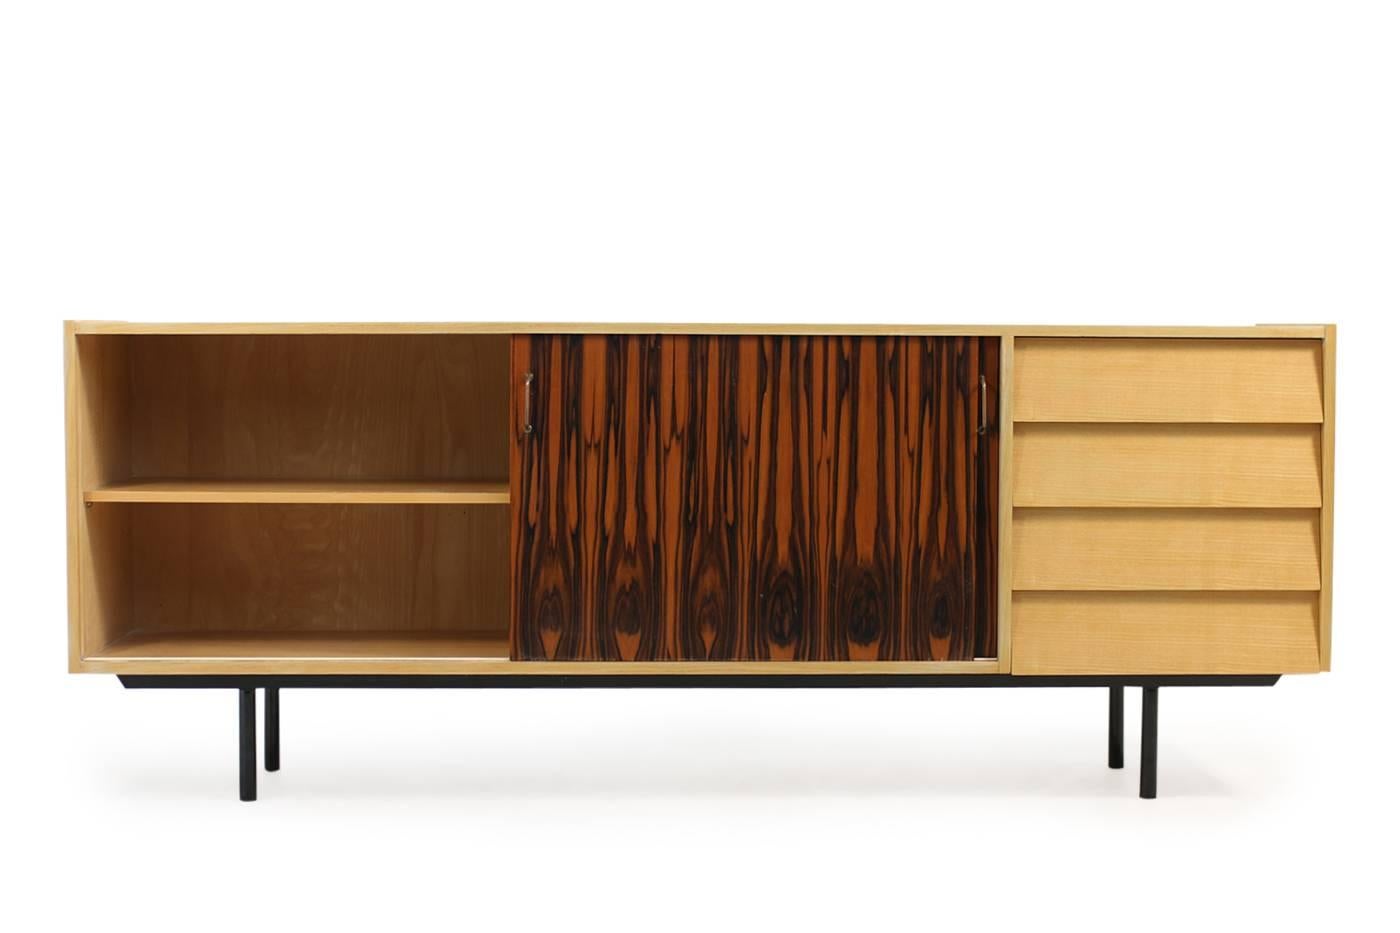 Beautiful and super rare Mid-Century Modern sideboard, 1950s Minimalist design, metal legs, kind of makassar sliding doors with brass handles, drawers, fantastic condition. Most likely a custom work or made to order object, never saw it before. It